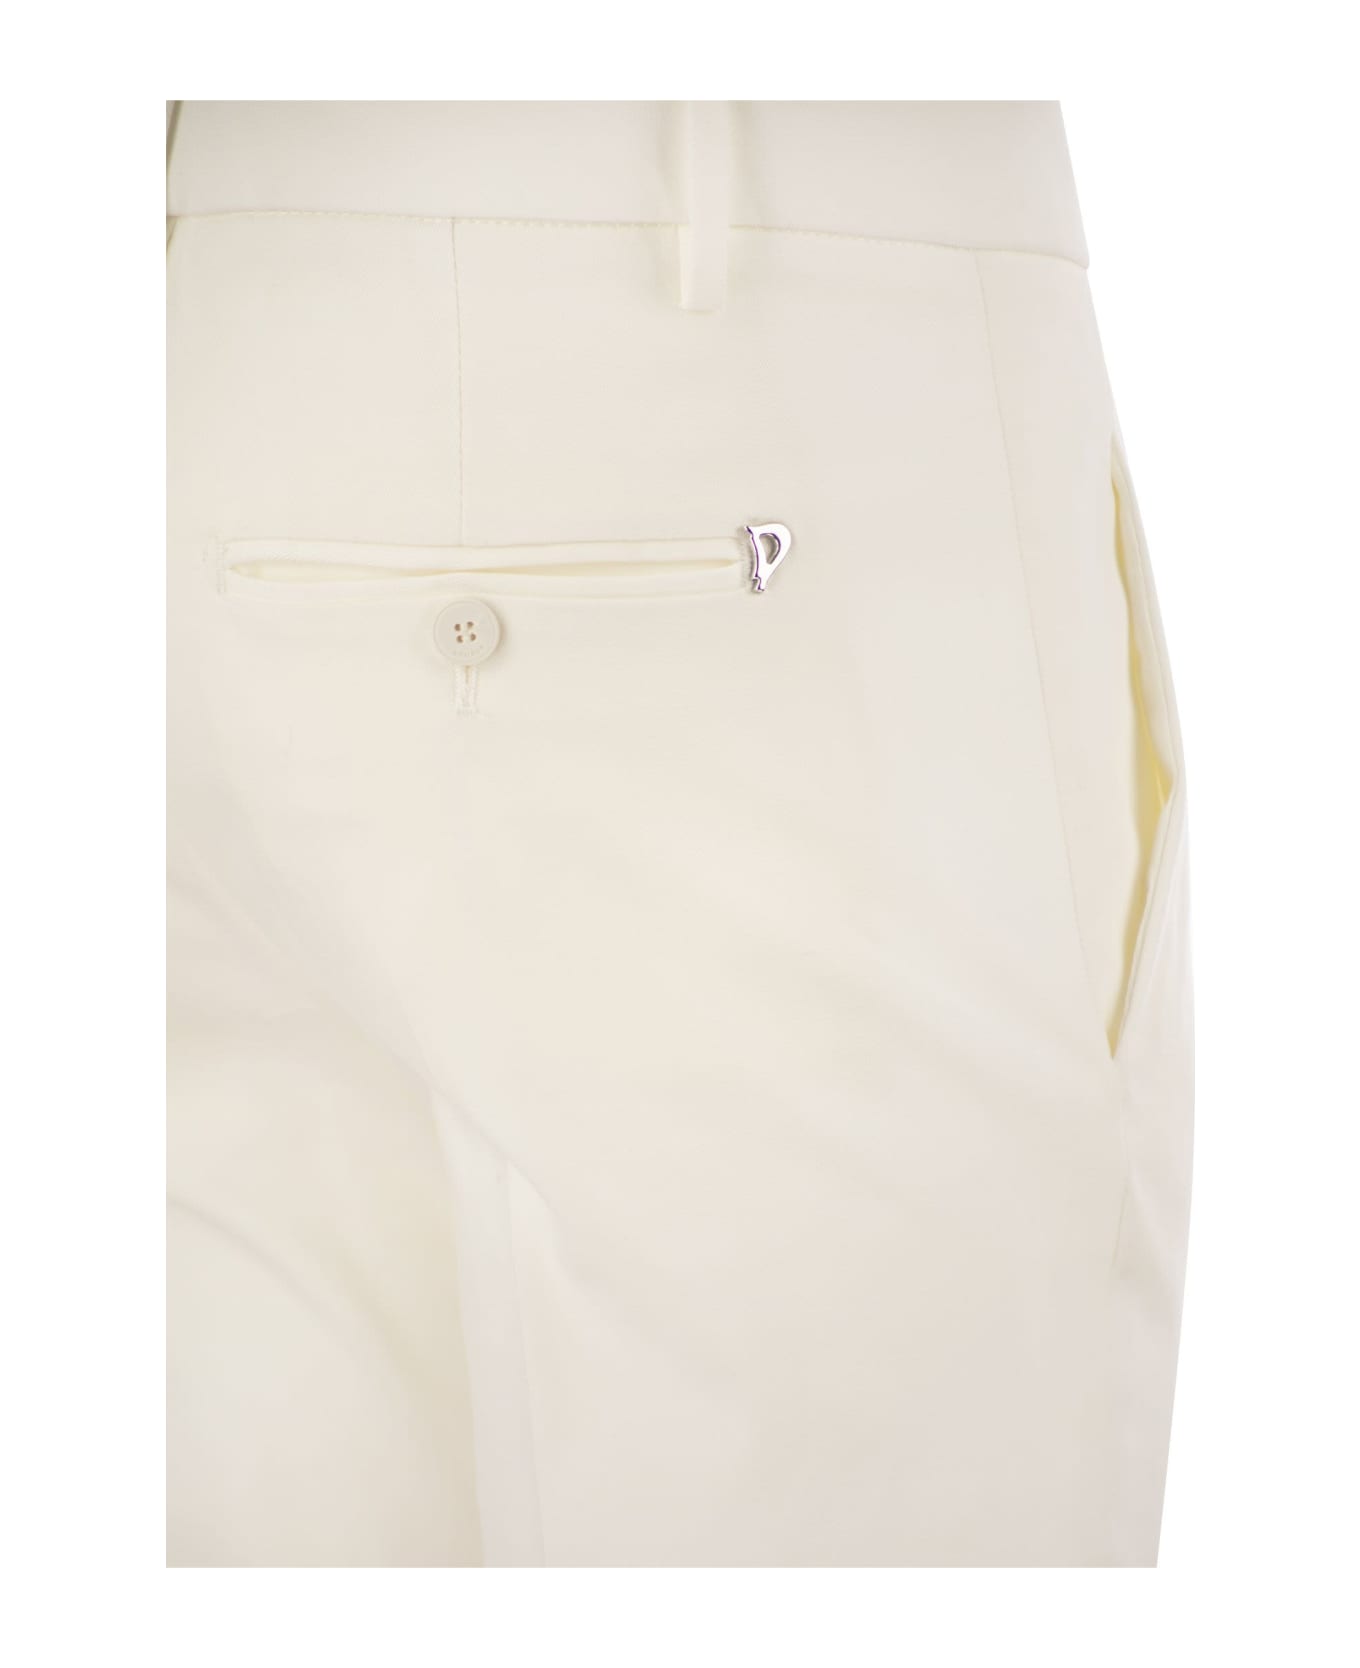 Dondup Perfect - Slim Fit Stretch Trousers - White ボトムス